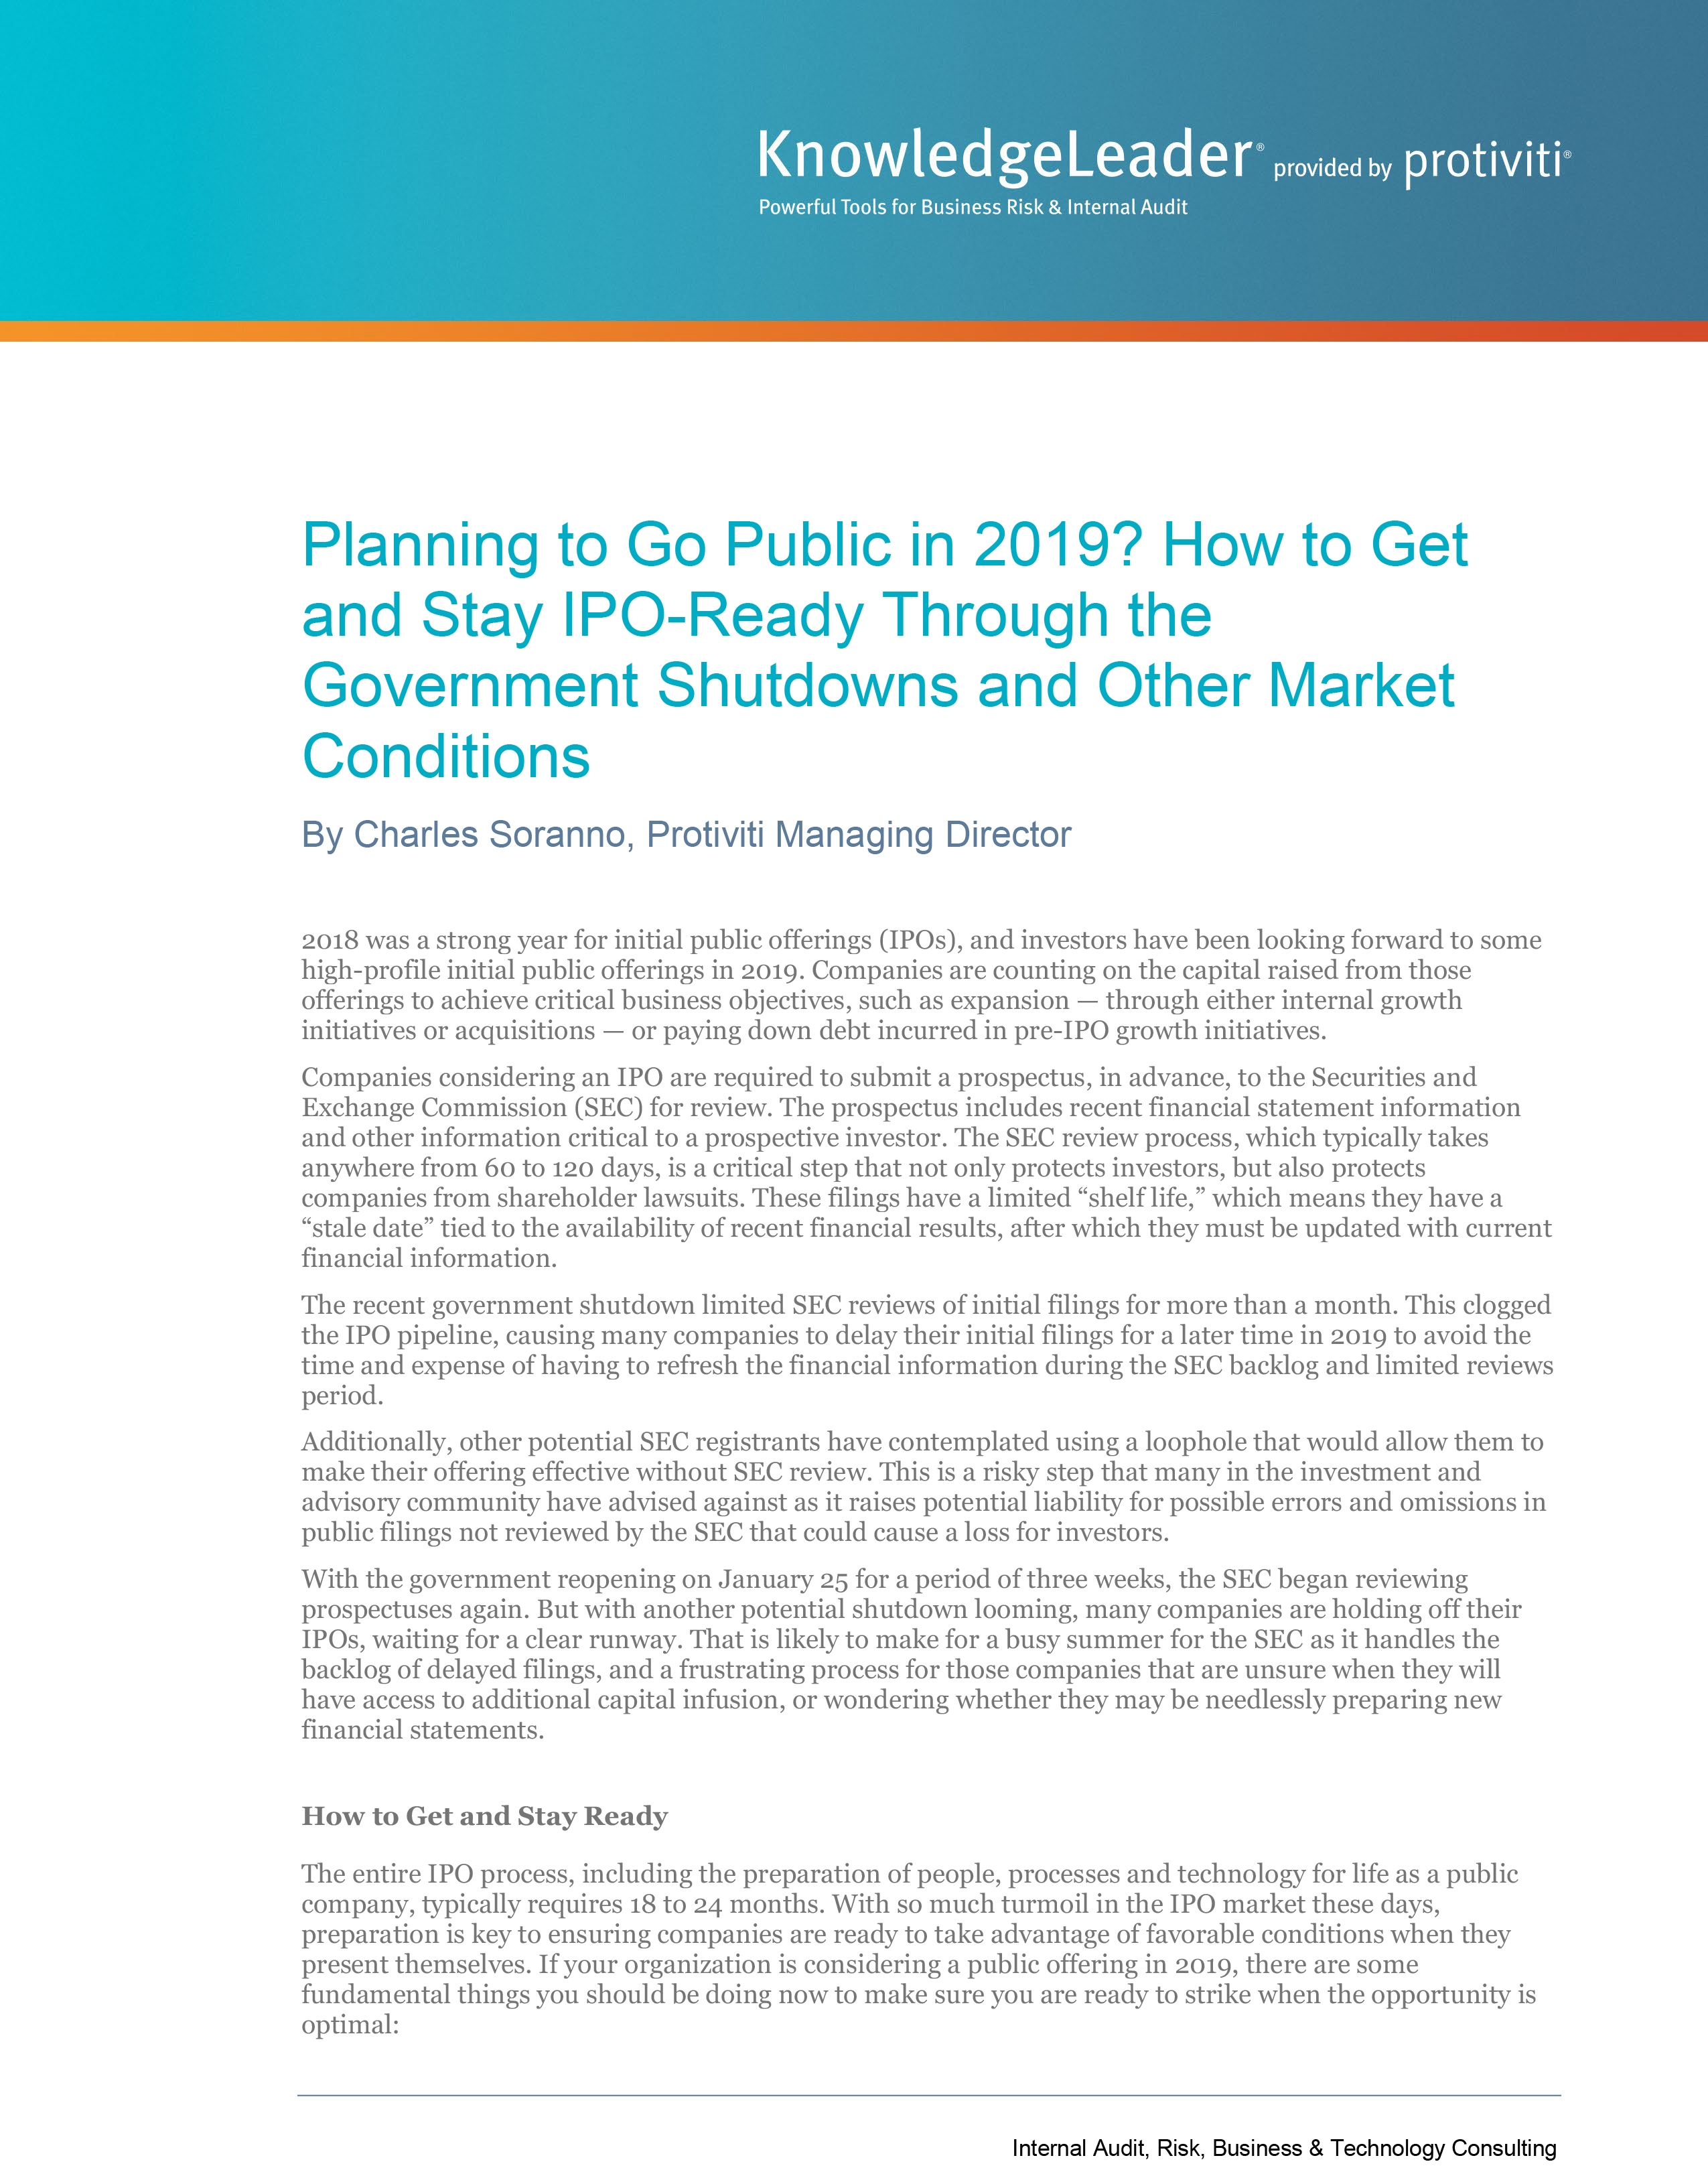 Screenshot of the first page of Planning to Go Public in 2019-How to Get and Stay IPO-Ready Through the Government Shutdowns and Other Market Conditions